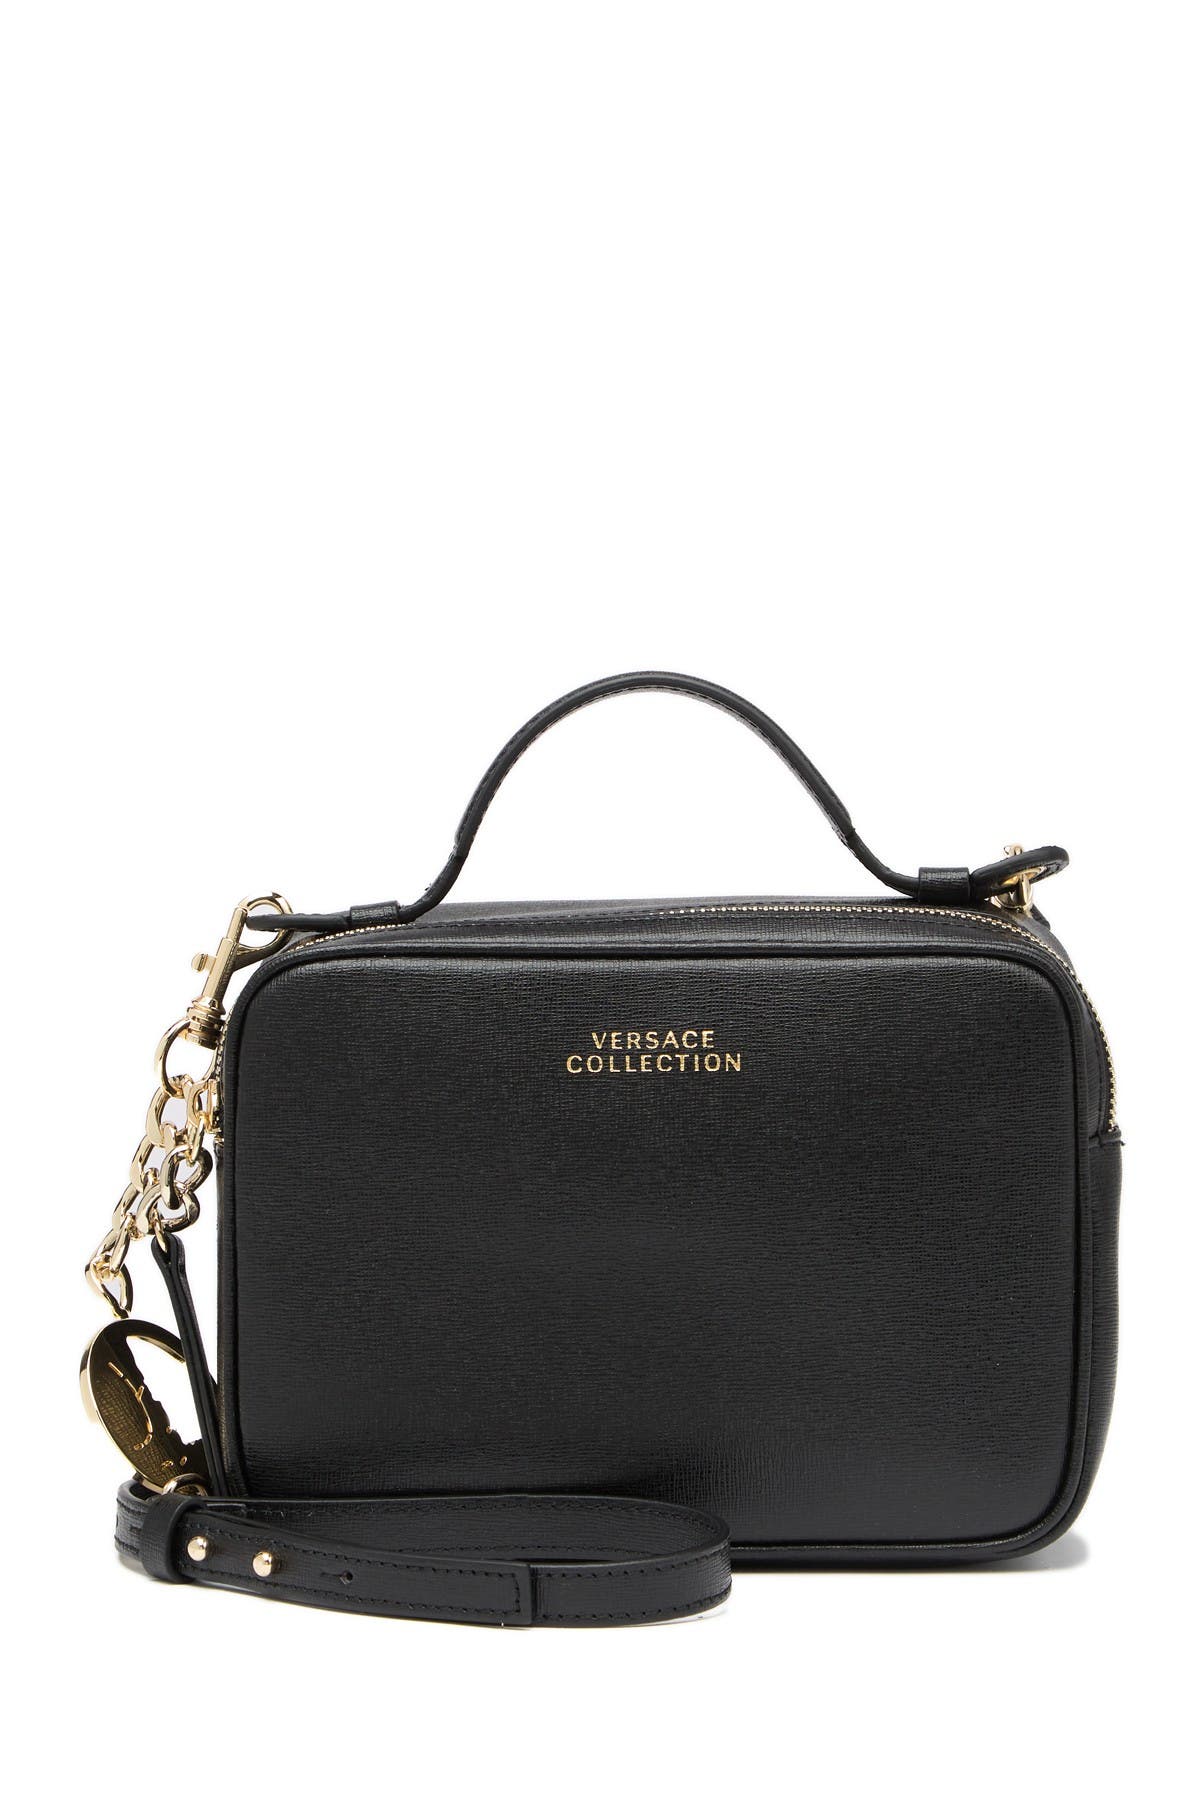 versace collection leather crossbody bag